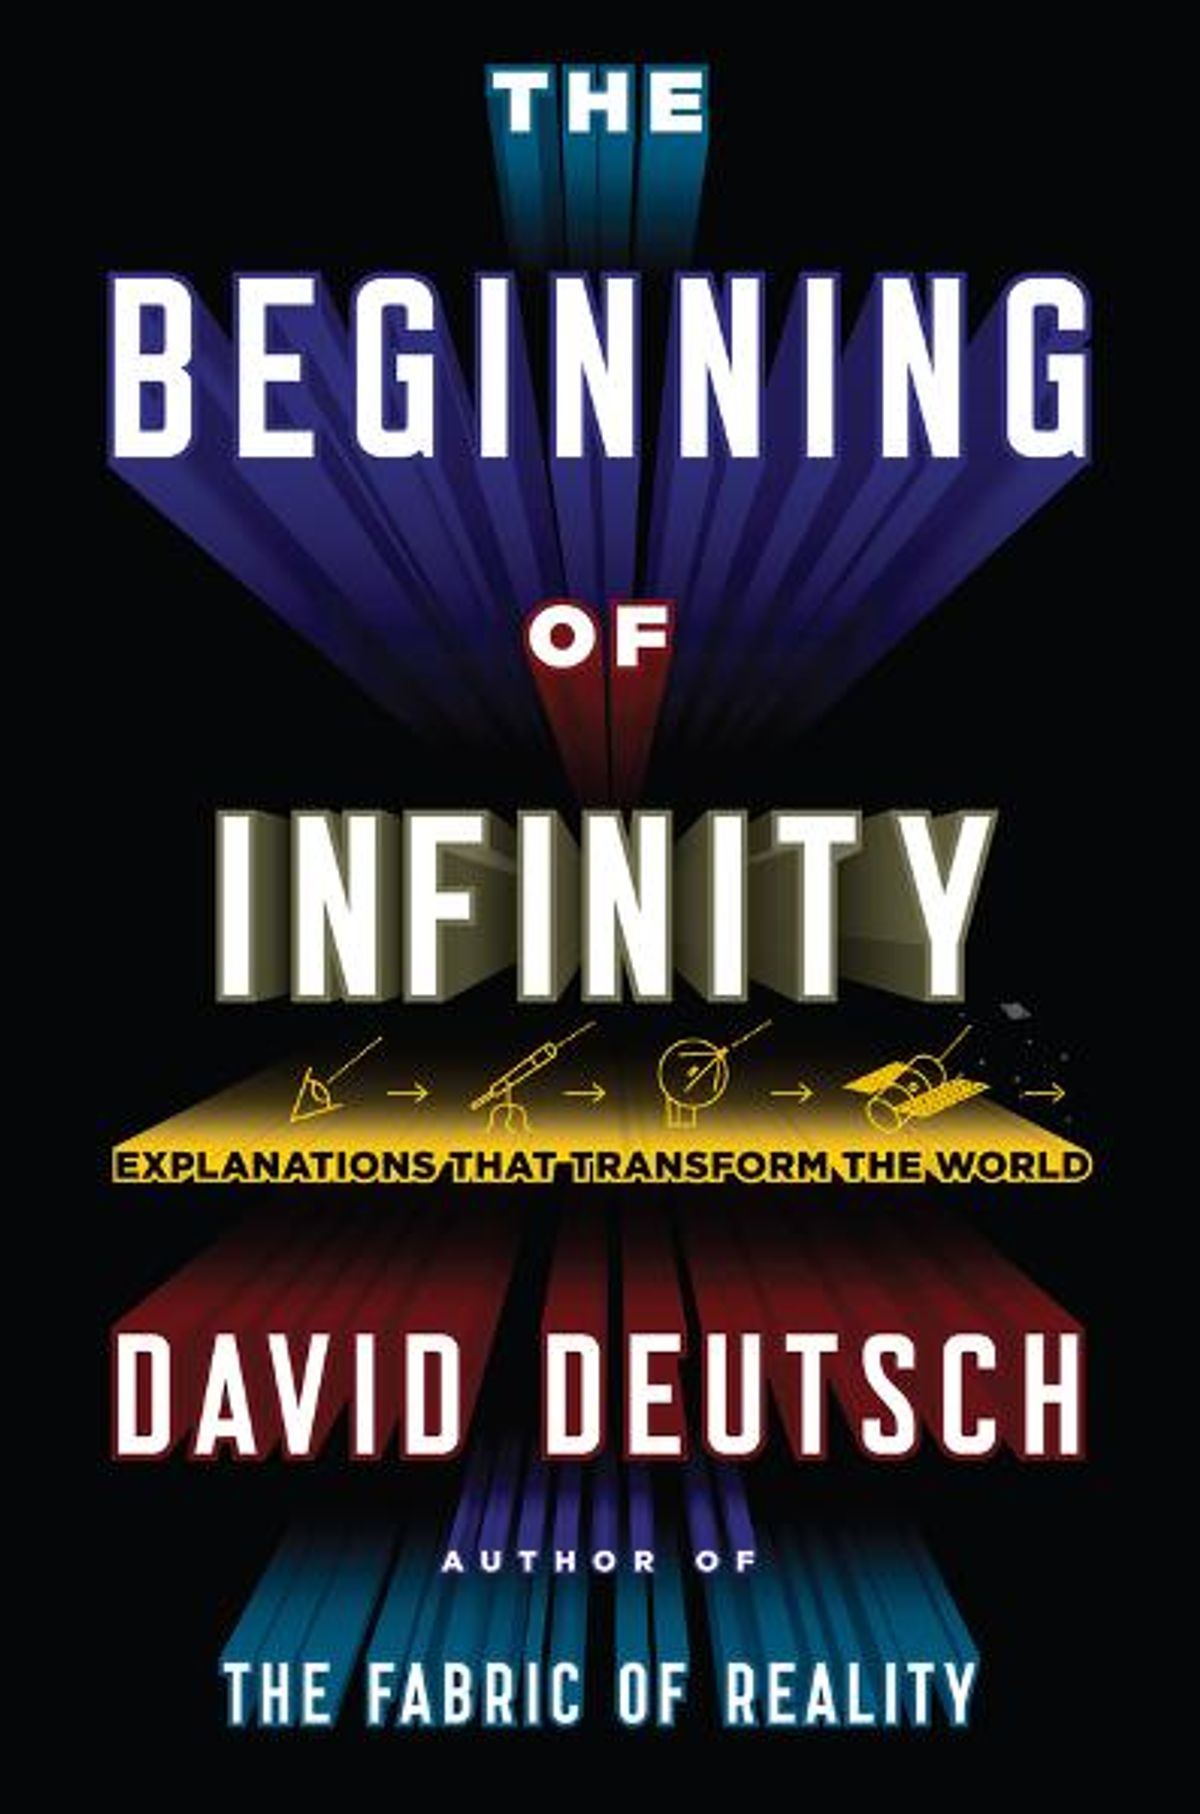 The cover of The Beginning of Infinity